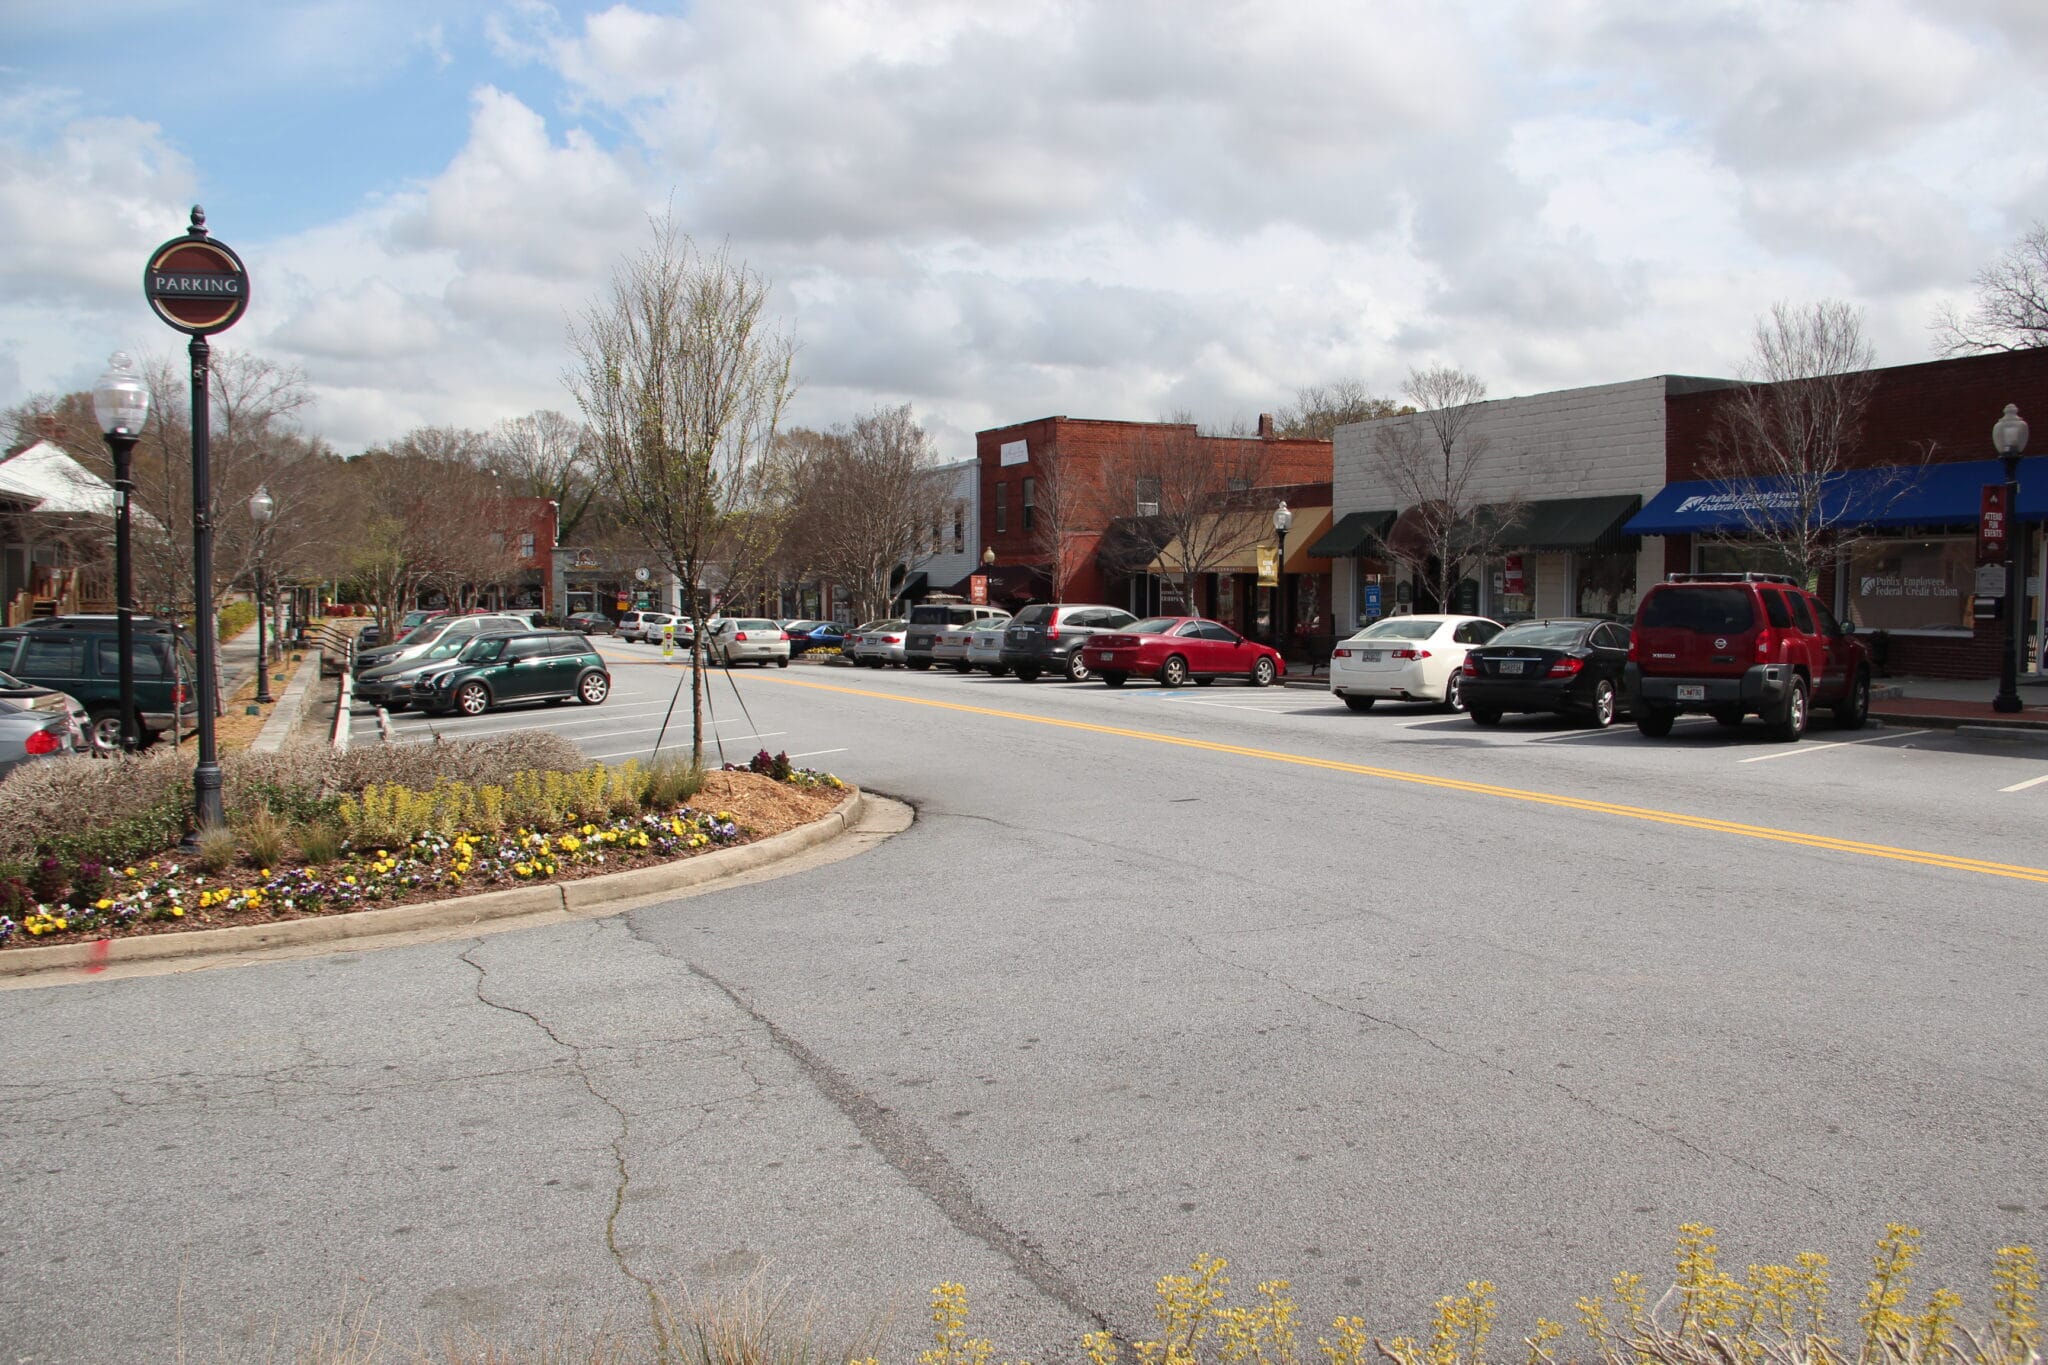 Film crew to close streets in Downtown Norcross Thursday